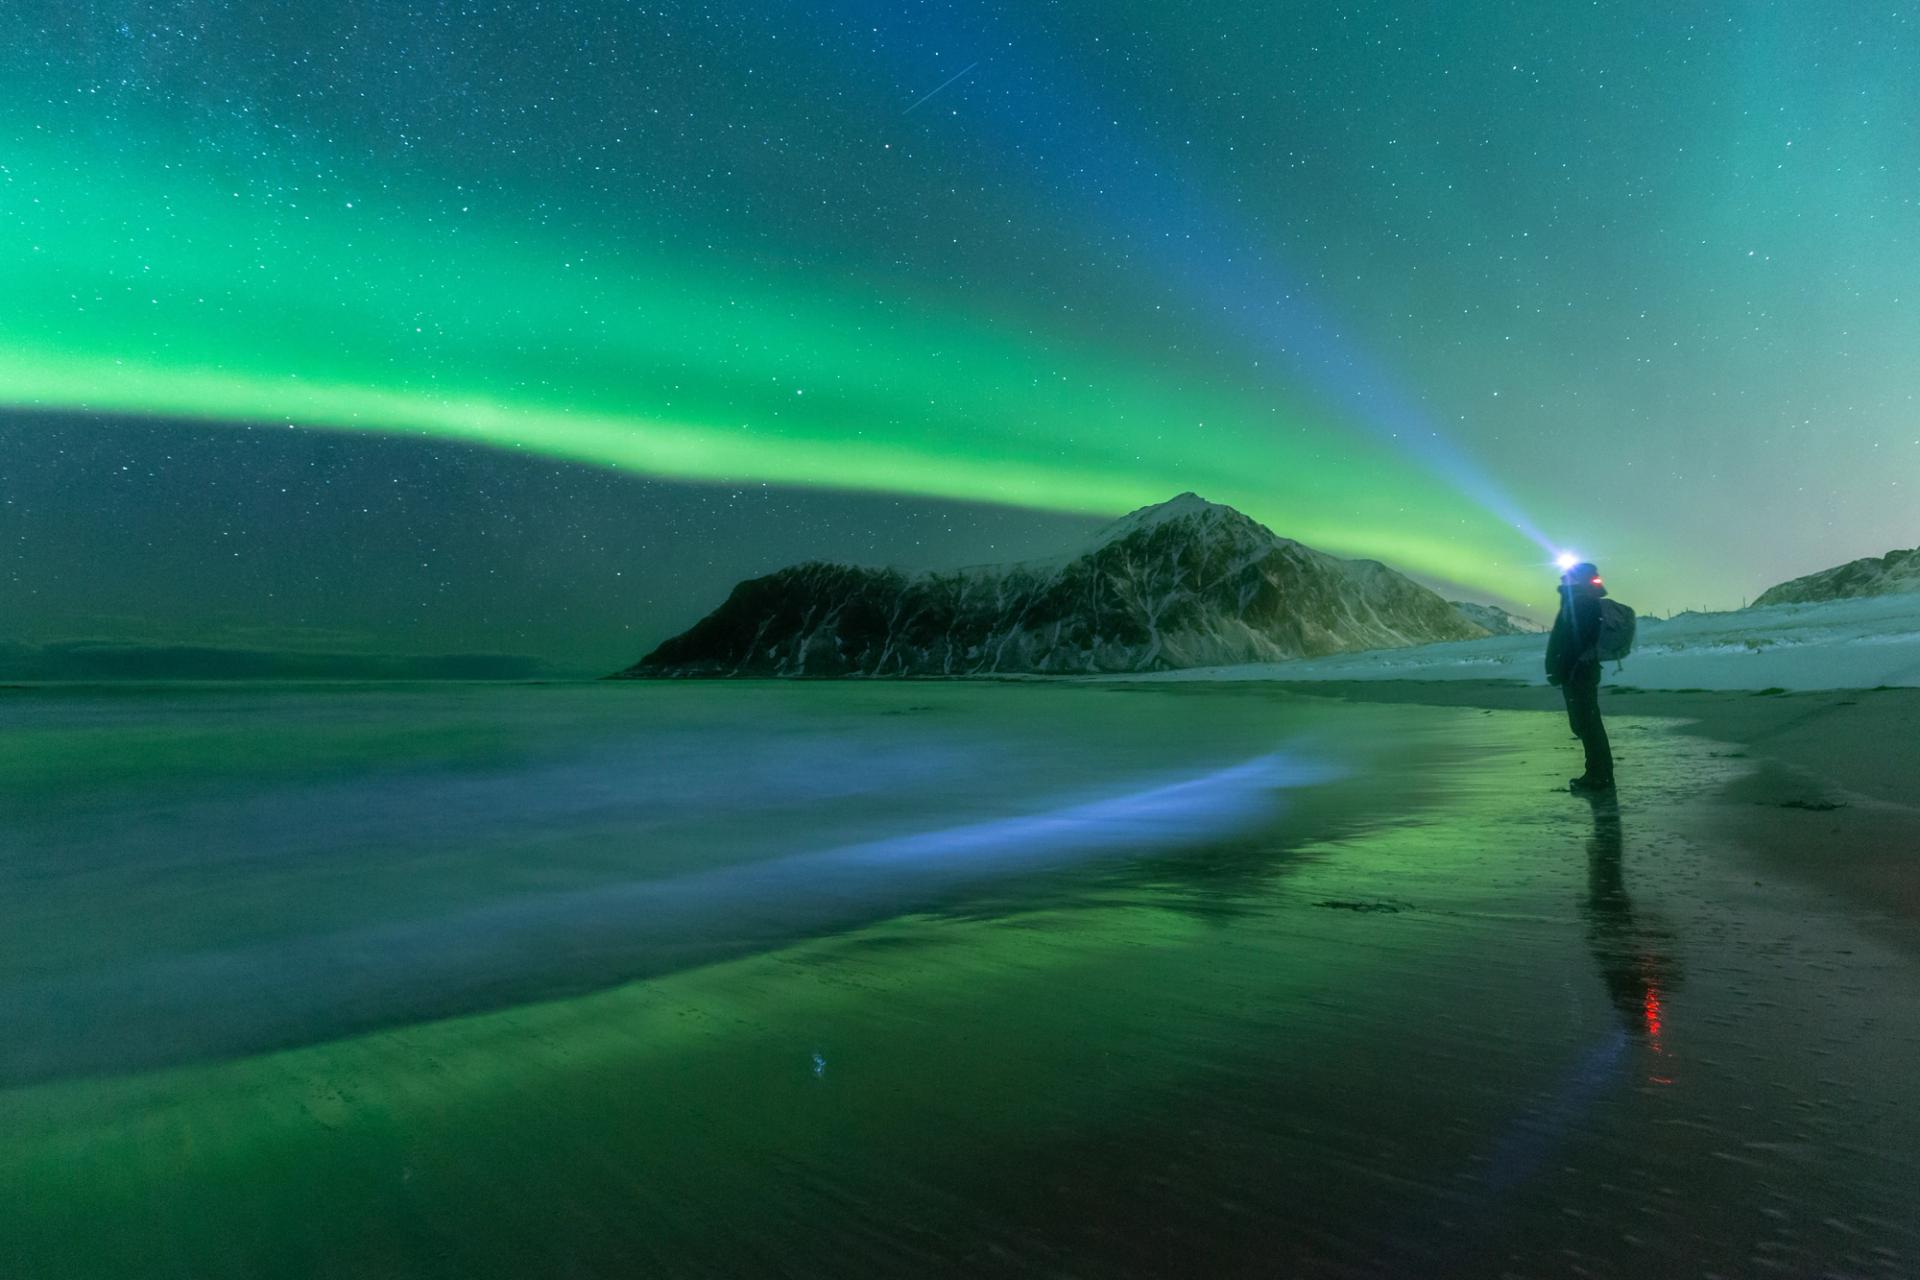 November in iceland: A picture of a person looking at the Northern Lights in Iceland during off season